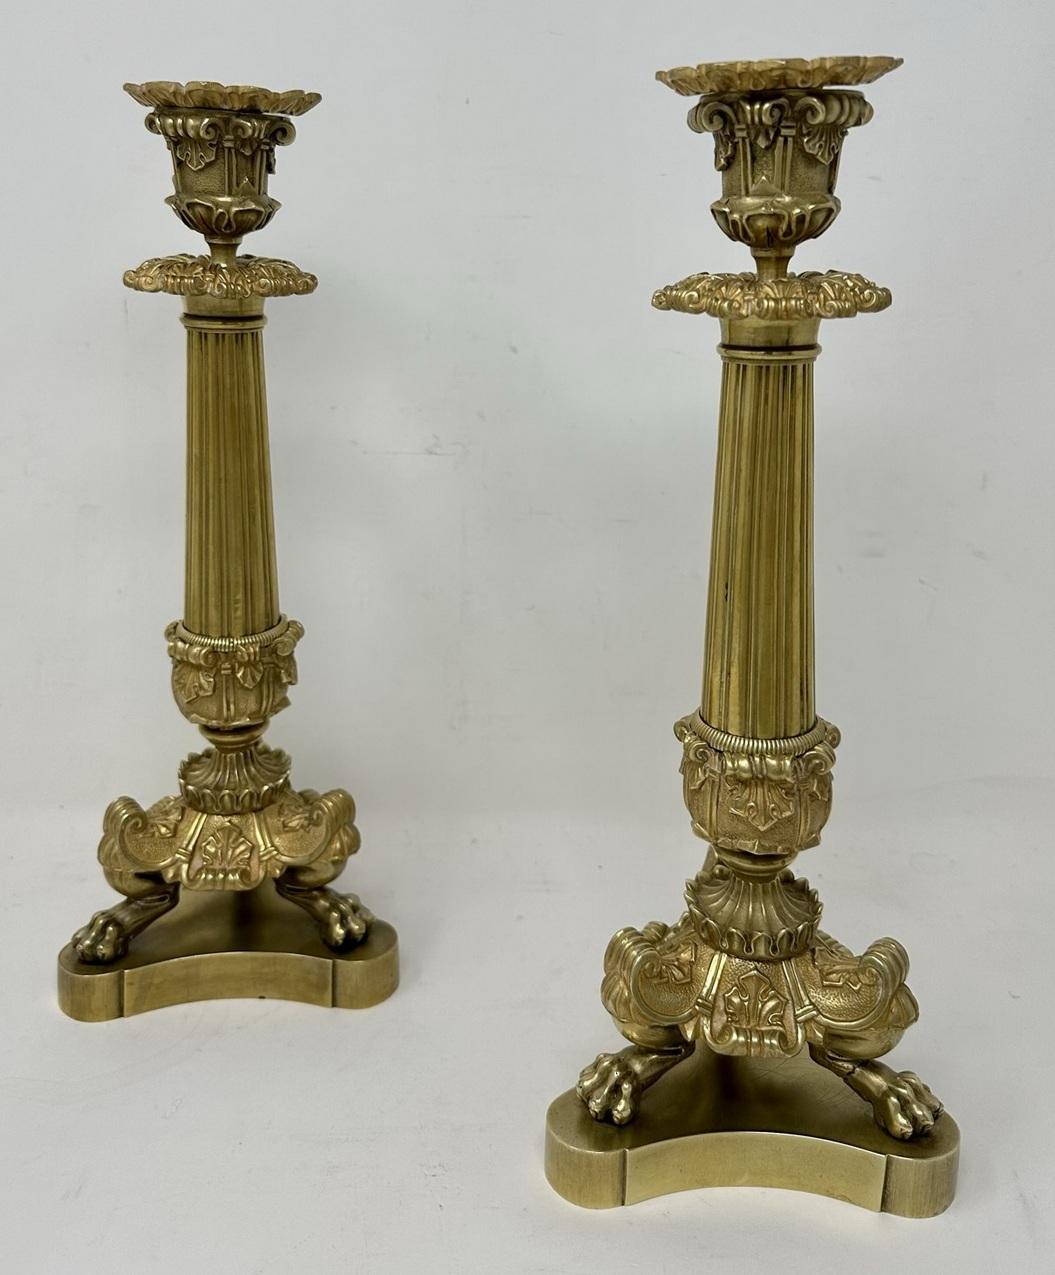 Stunning Pair French Heavy Gauge Ormolu Bronze Dore Single Light Mantle or Table Candlesticks of exhibition quality and of generous tall proportions. 

Each having a Campana-form leaf cast candle socket with original firm fitting removable foliate